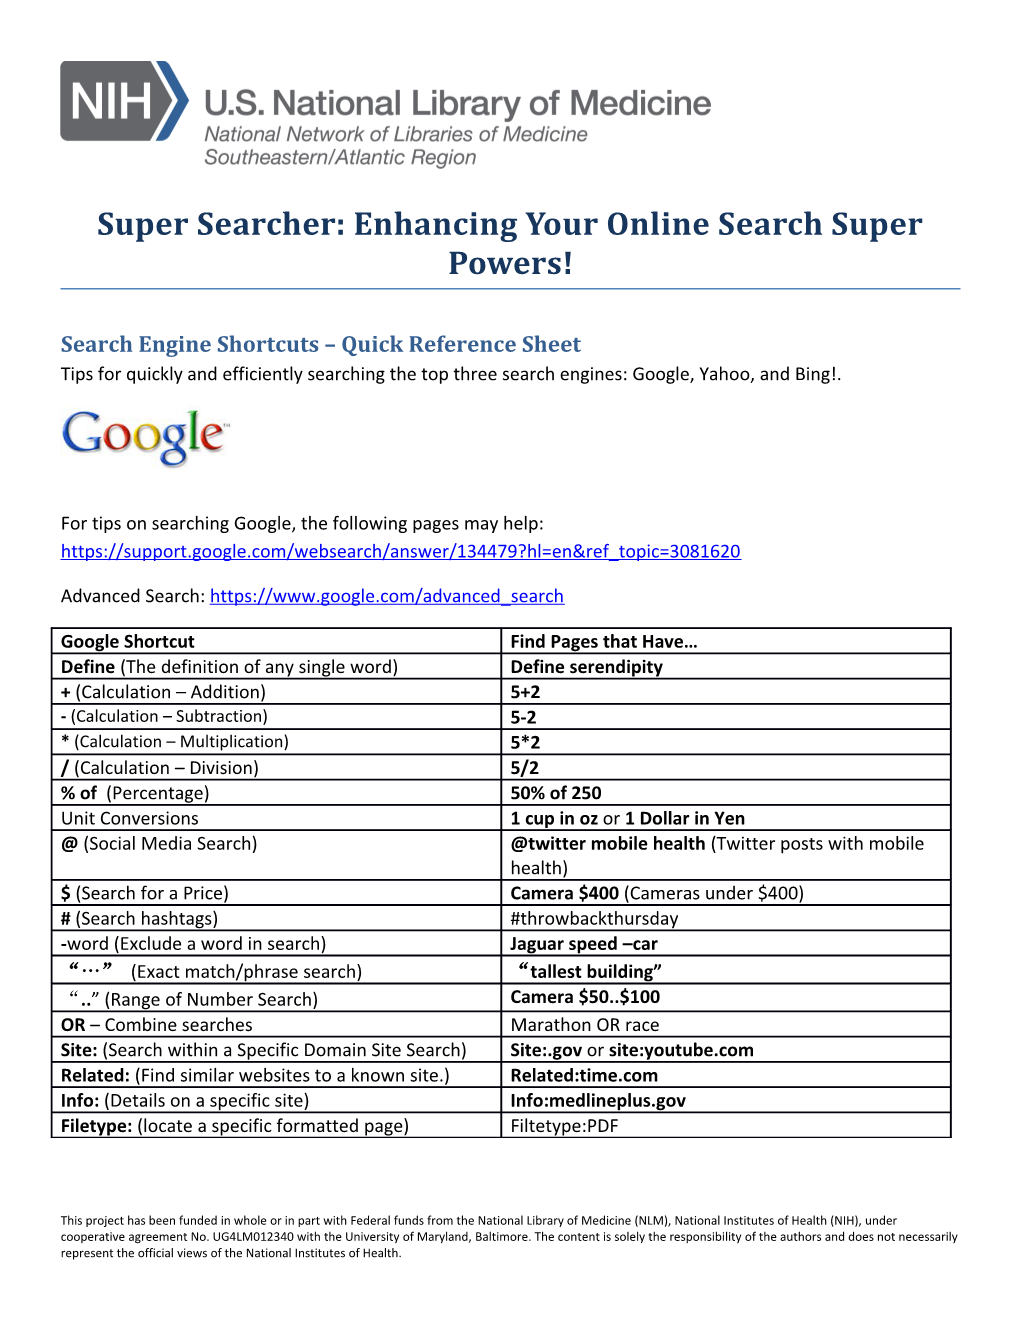 Super Searcher: Enhancing Your Online Search Super Powers!